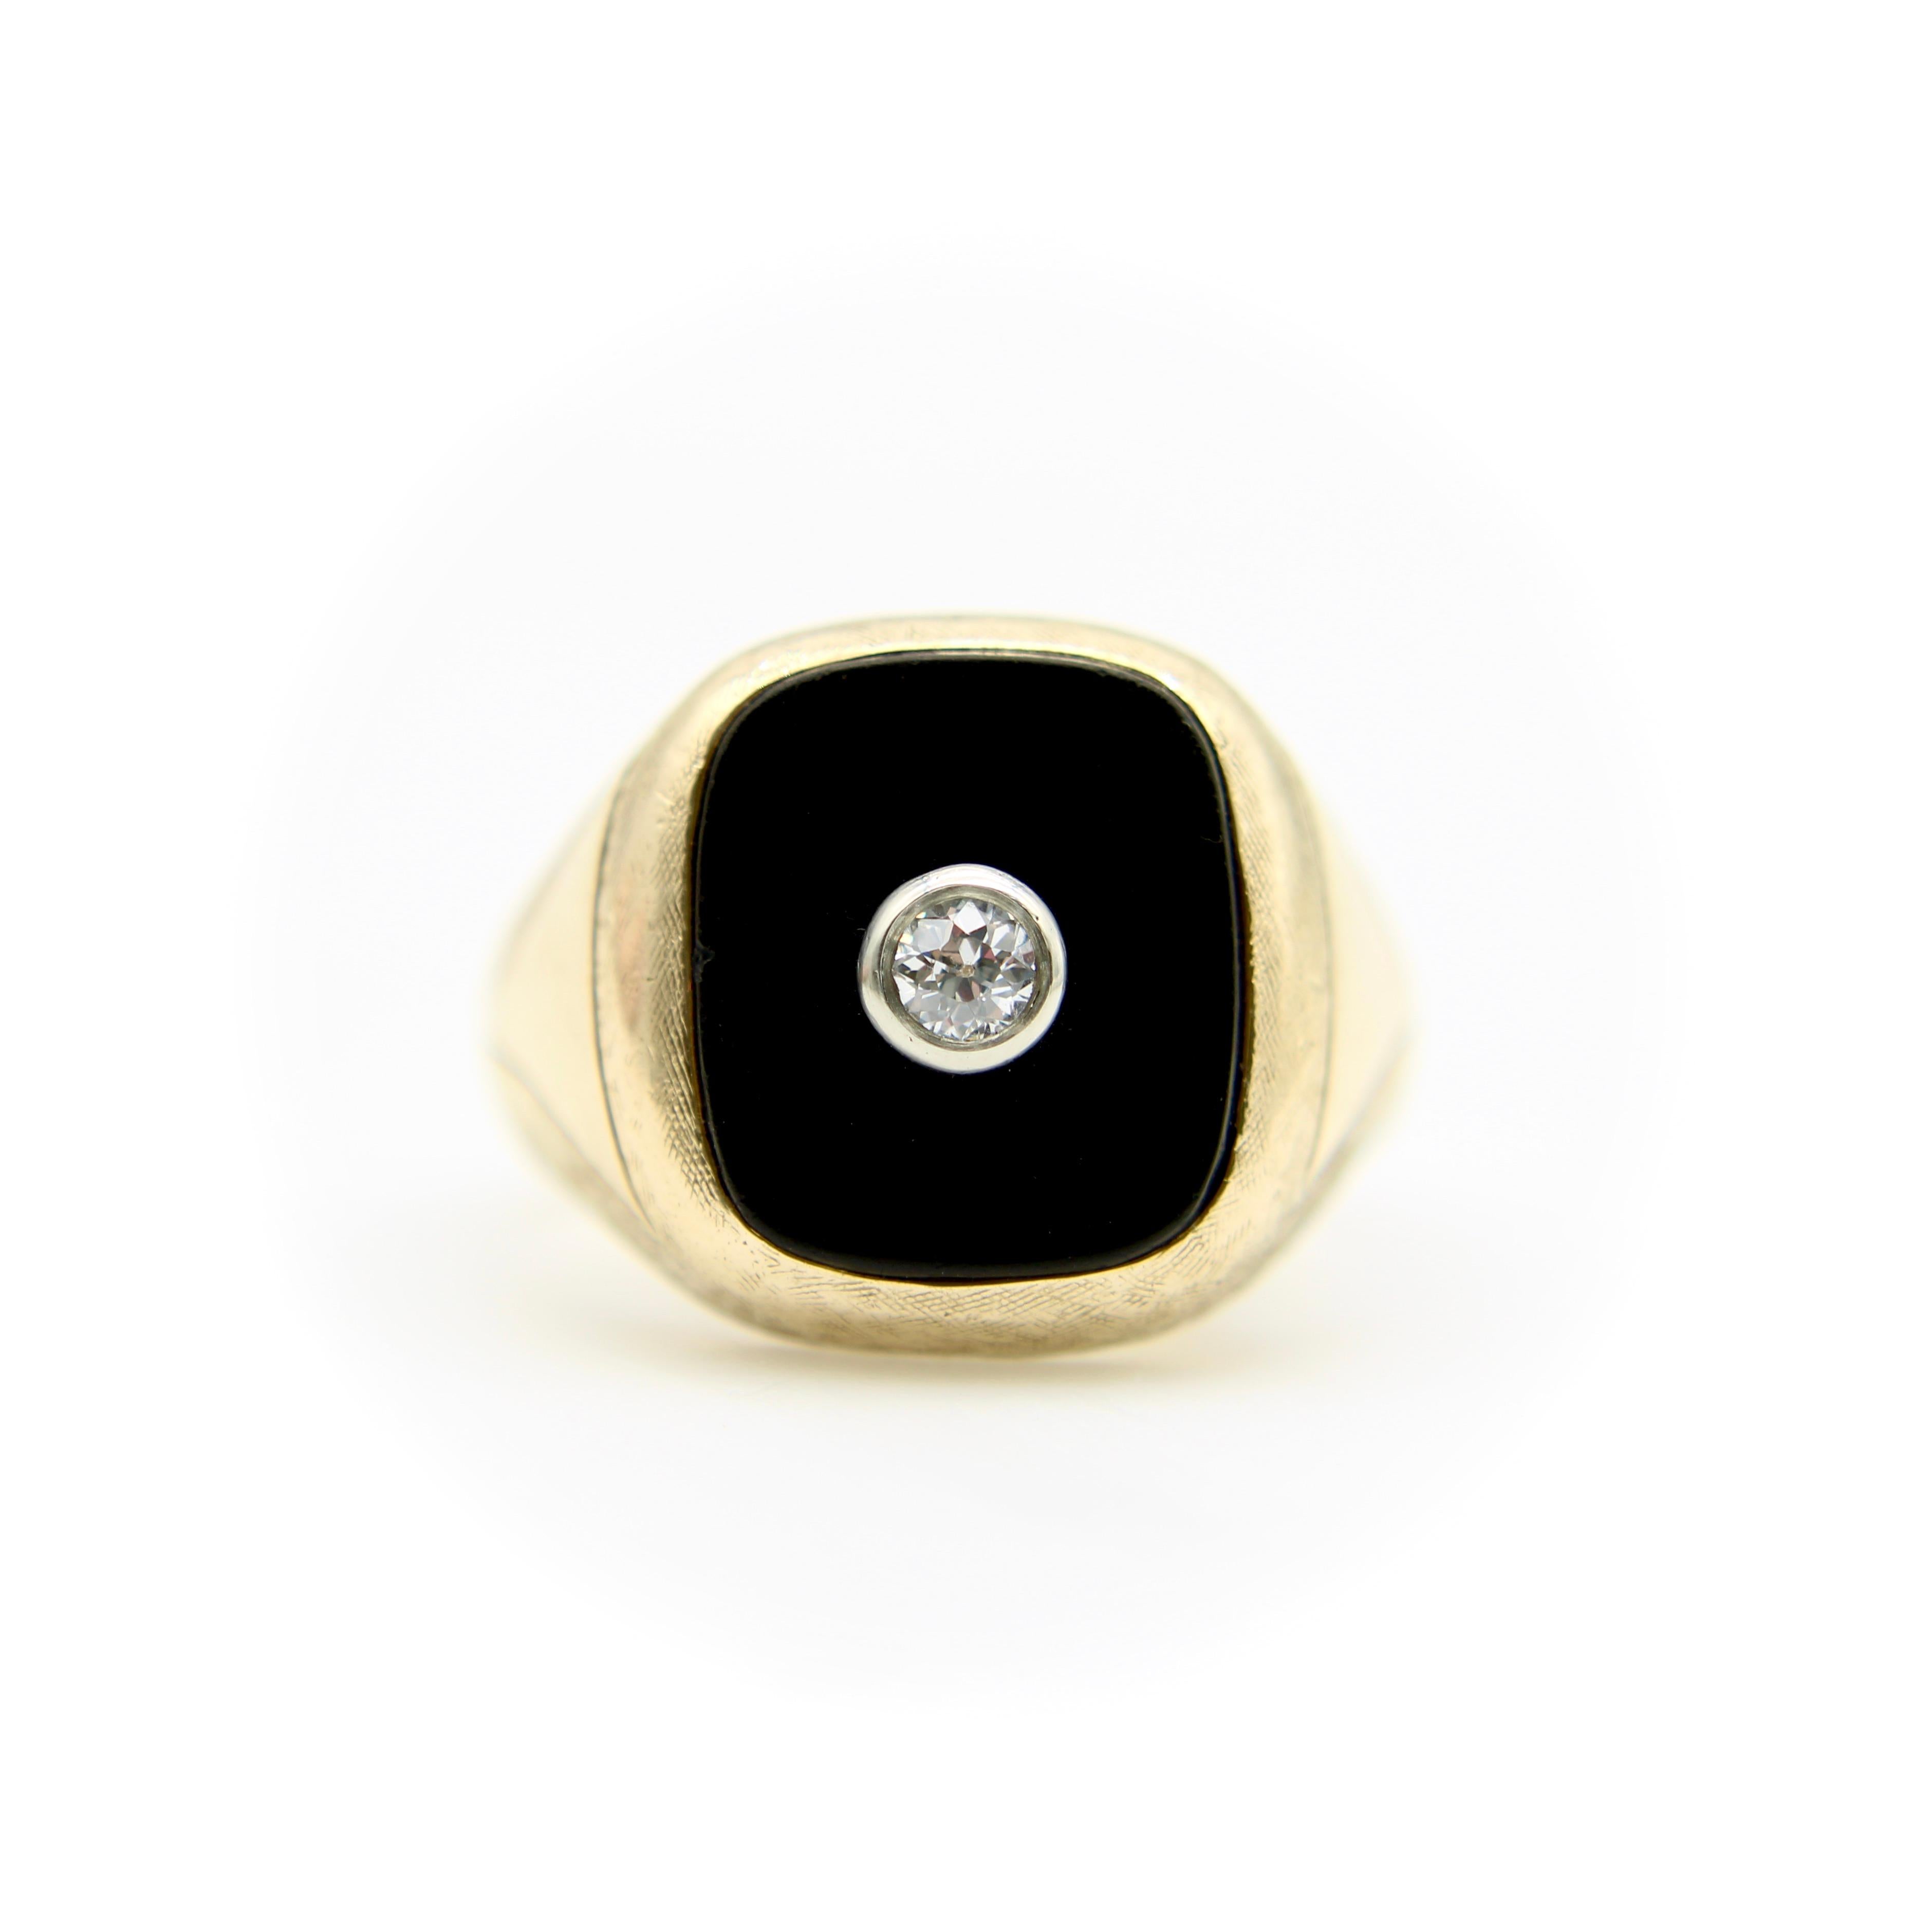 This is a classic Art Deco men’s ring, circa the 1920’s. The 14k gold ring features a rectangular onyx panel with rounded corners. In its center is an Old European Cut diamond, bezel set in platinum. The gold has a beautiful Florentine finish that